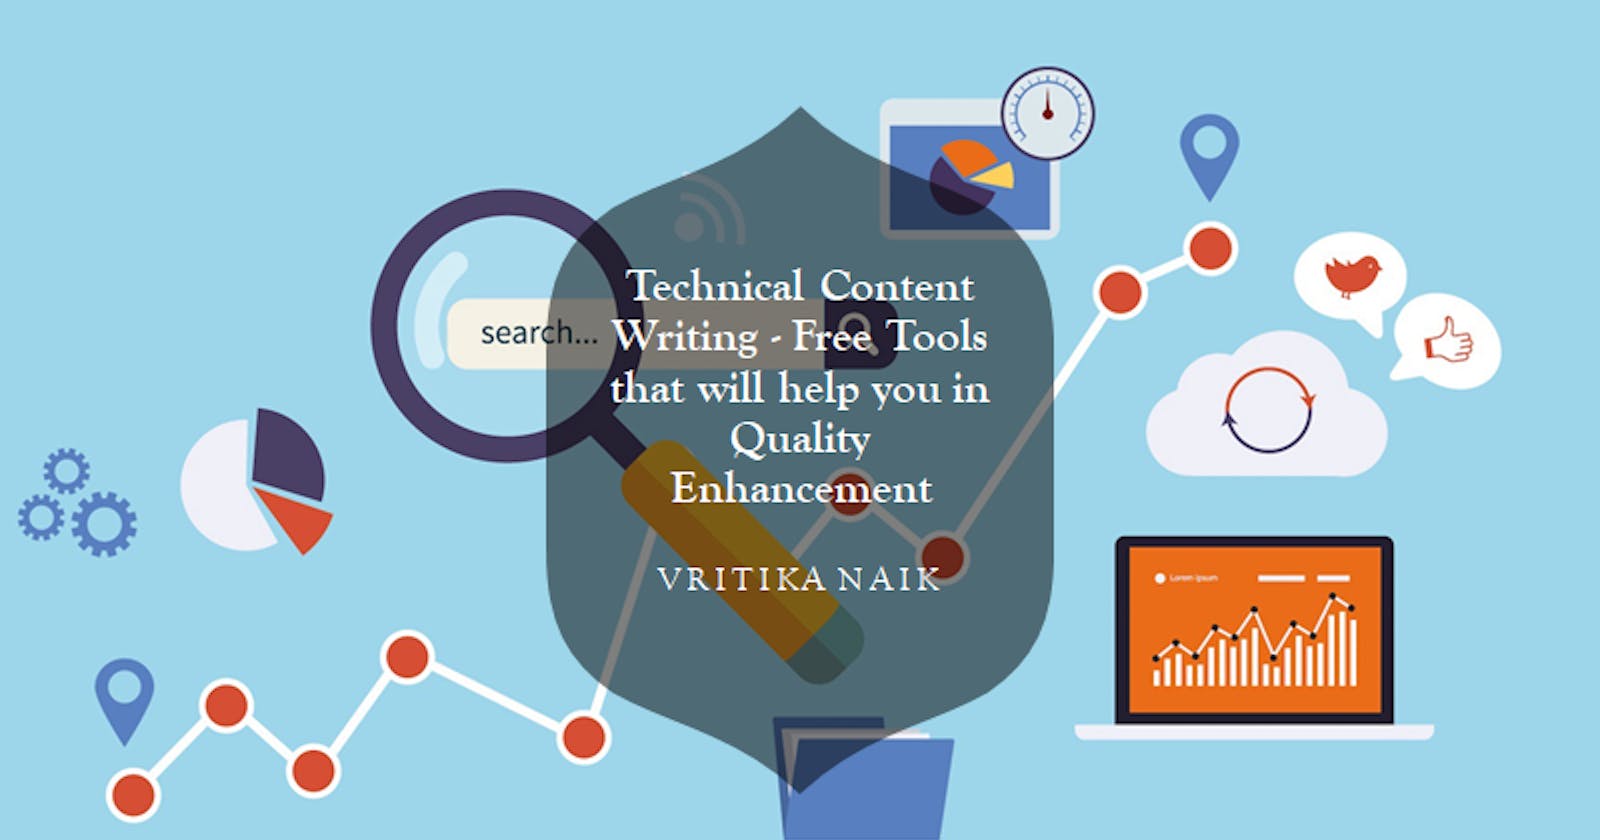 Technical Content Writing - Free Tools that will help you in Quality Enhancement